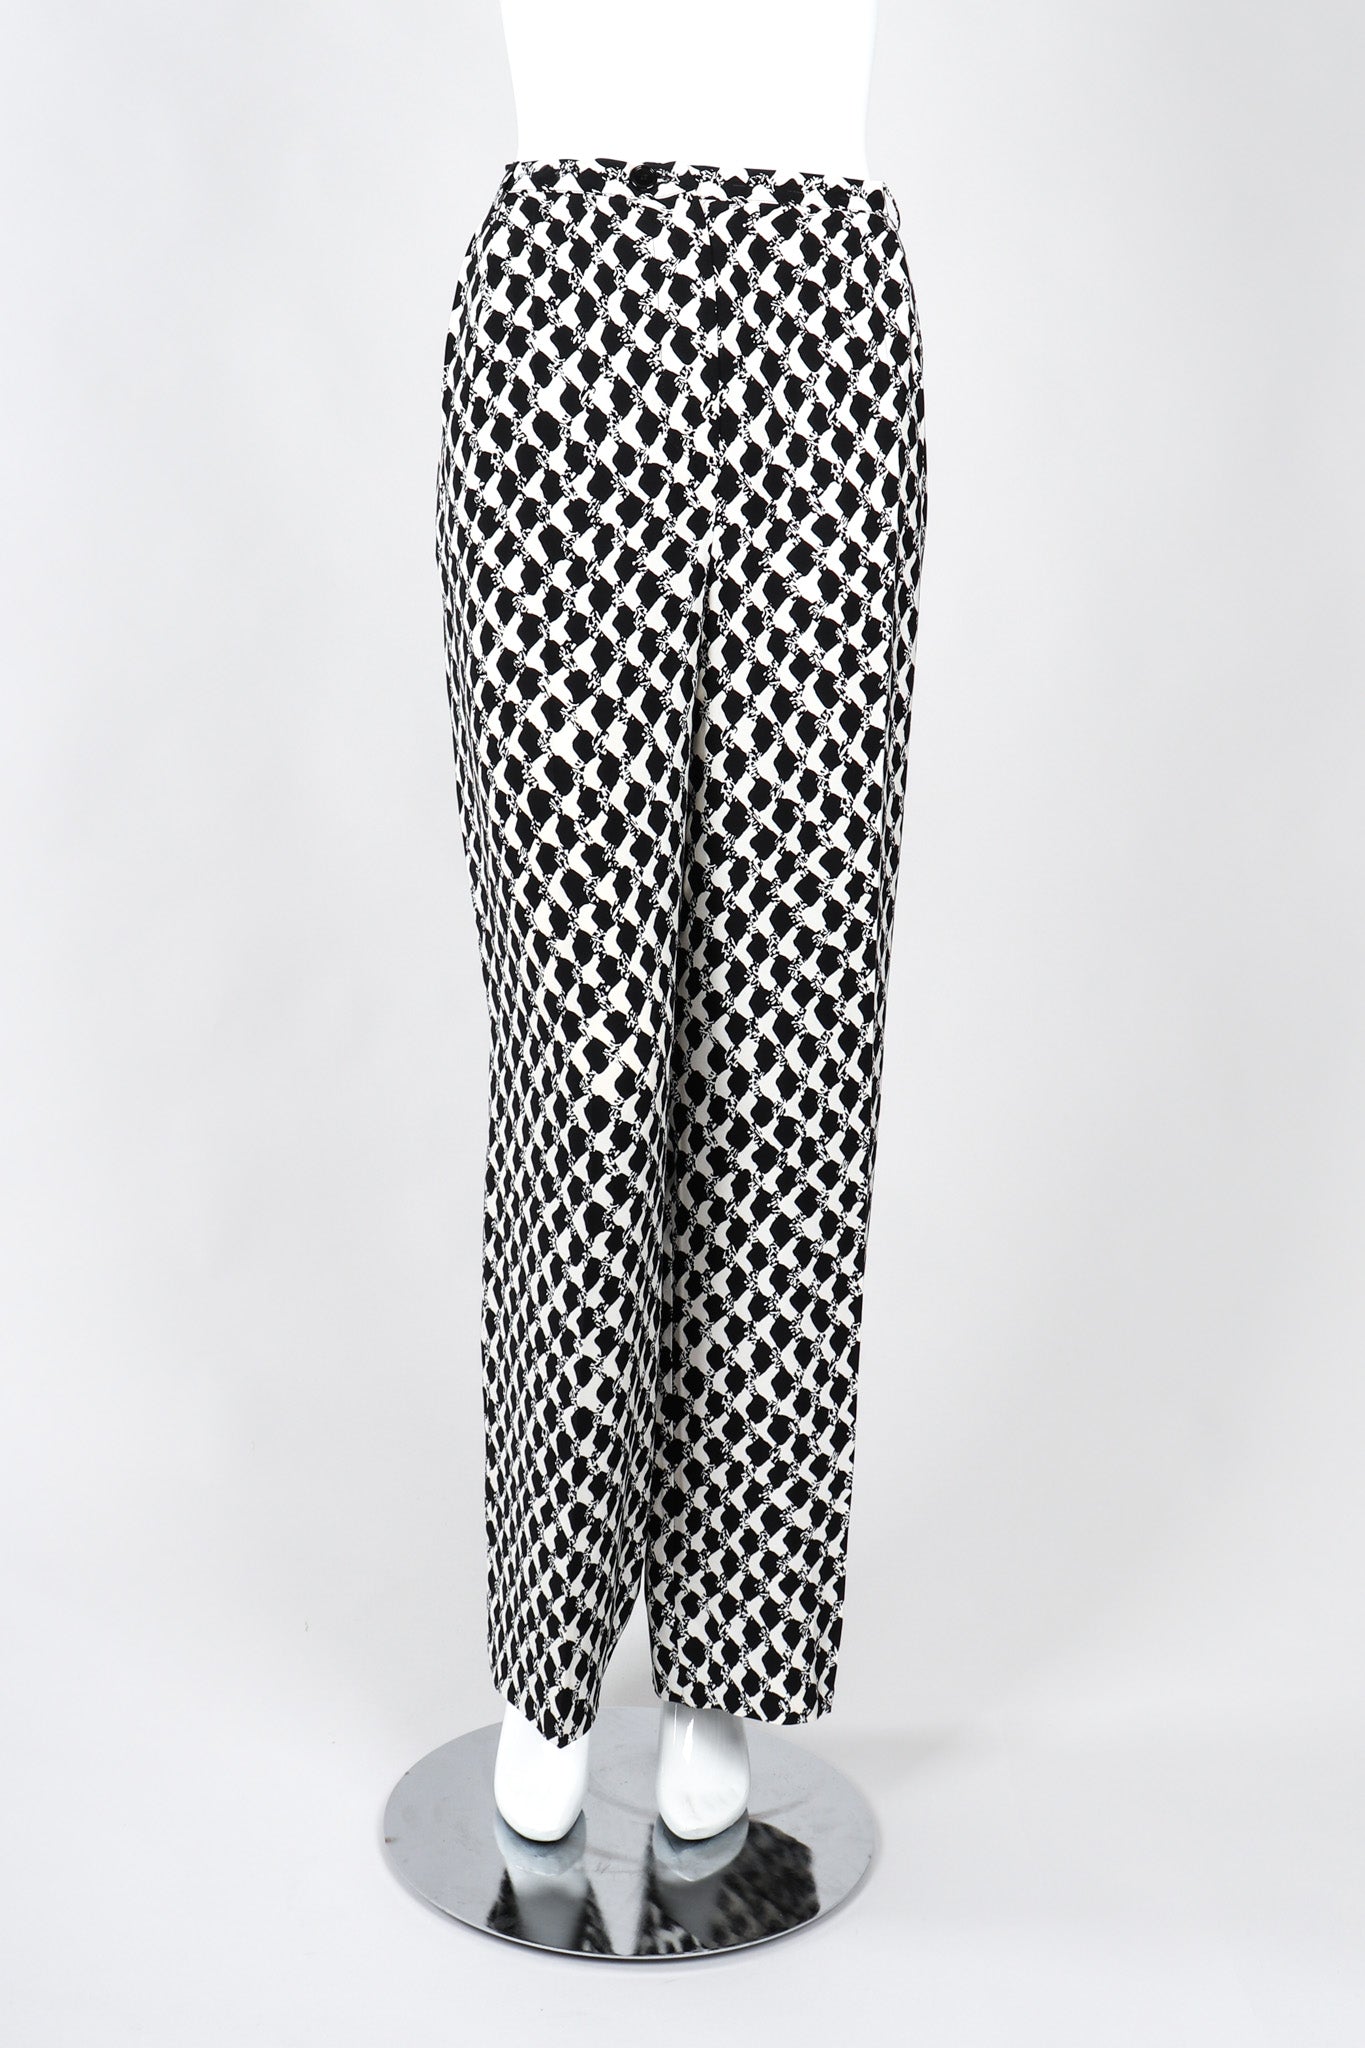 Recess Los Angeles Vintage Gianfranco Ferre Graphic Black And White Double Breasted Jacket Double Pleat Pants 